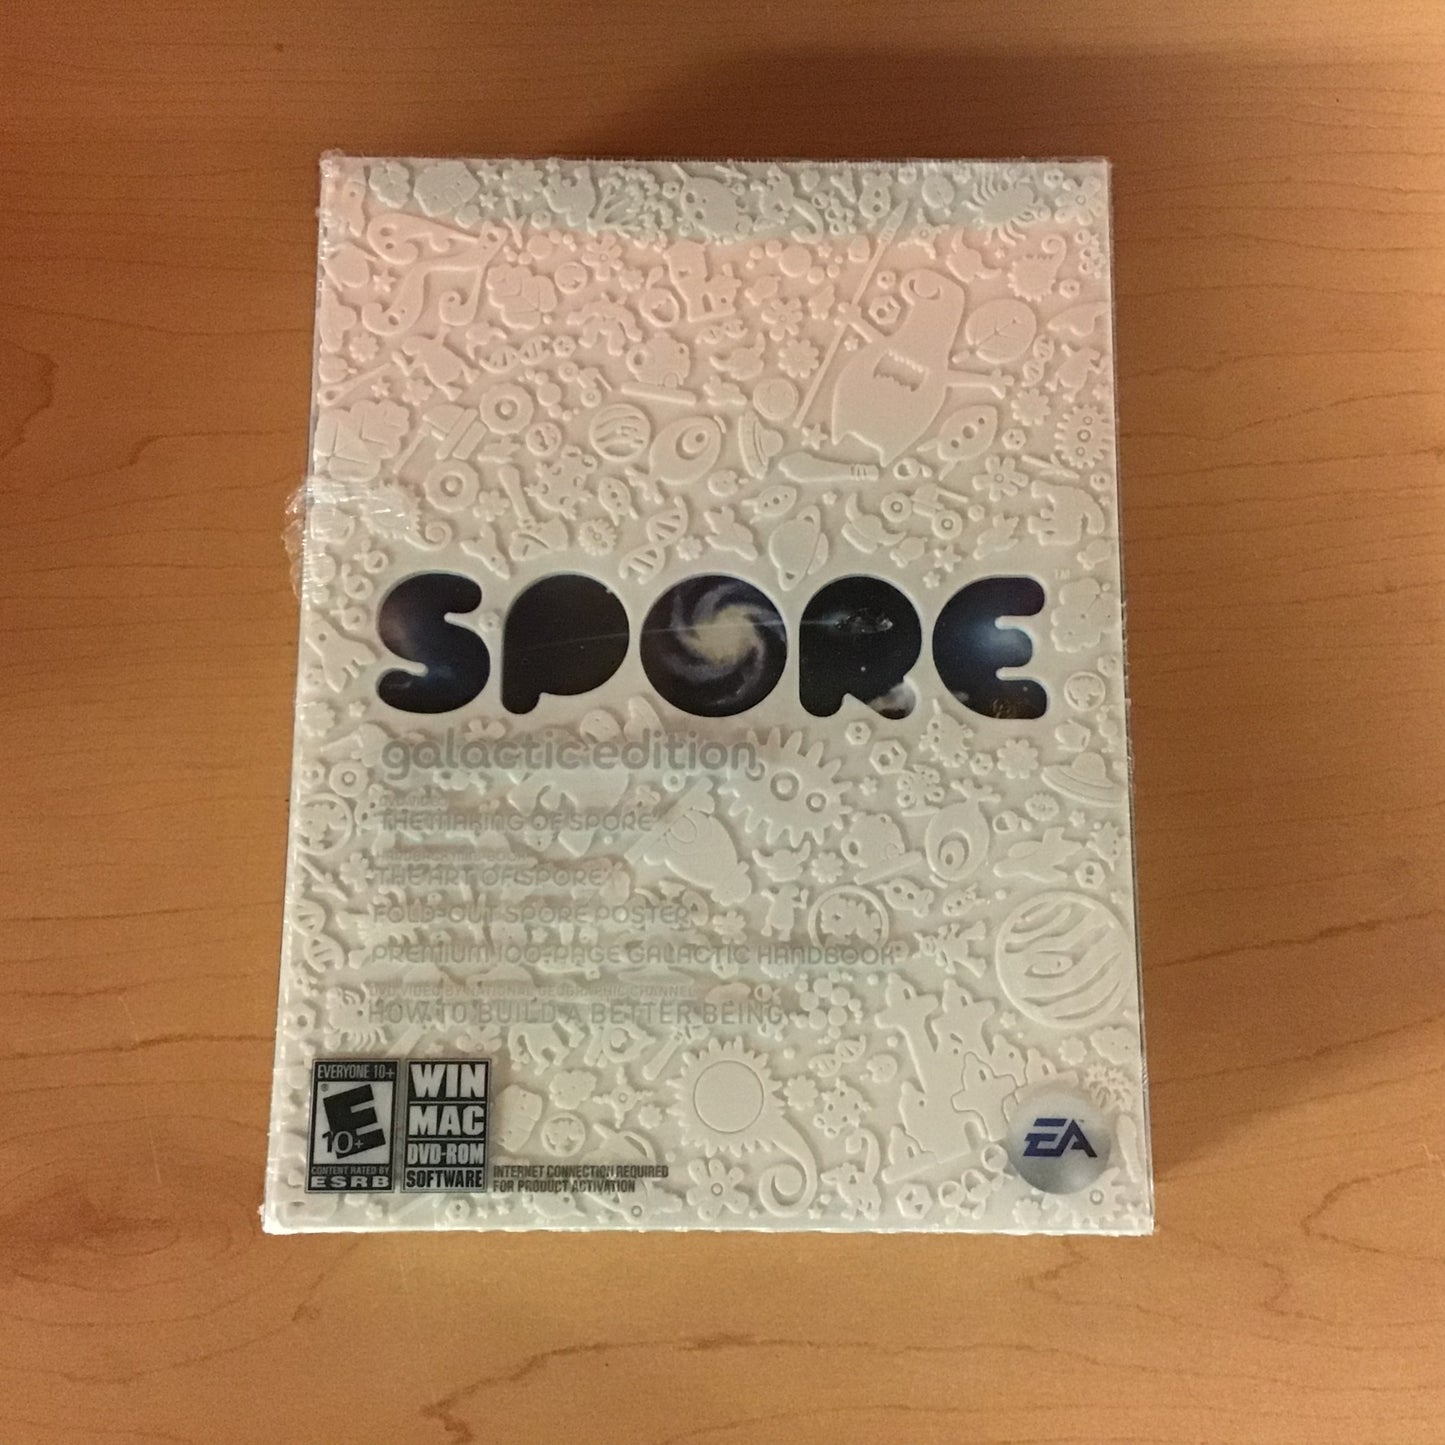 SPORE Galactic Edition PC Game